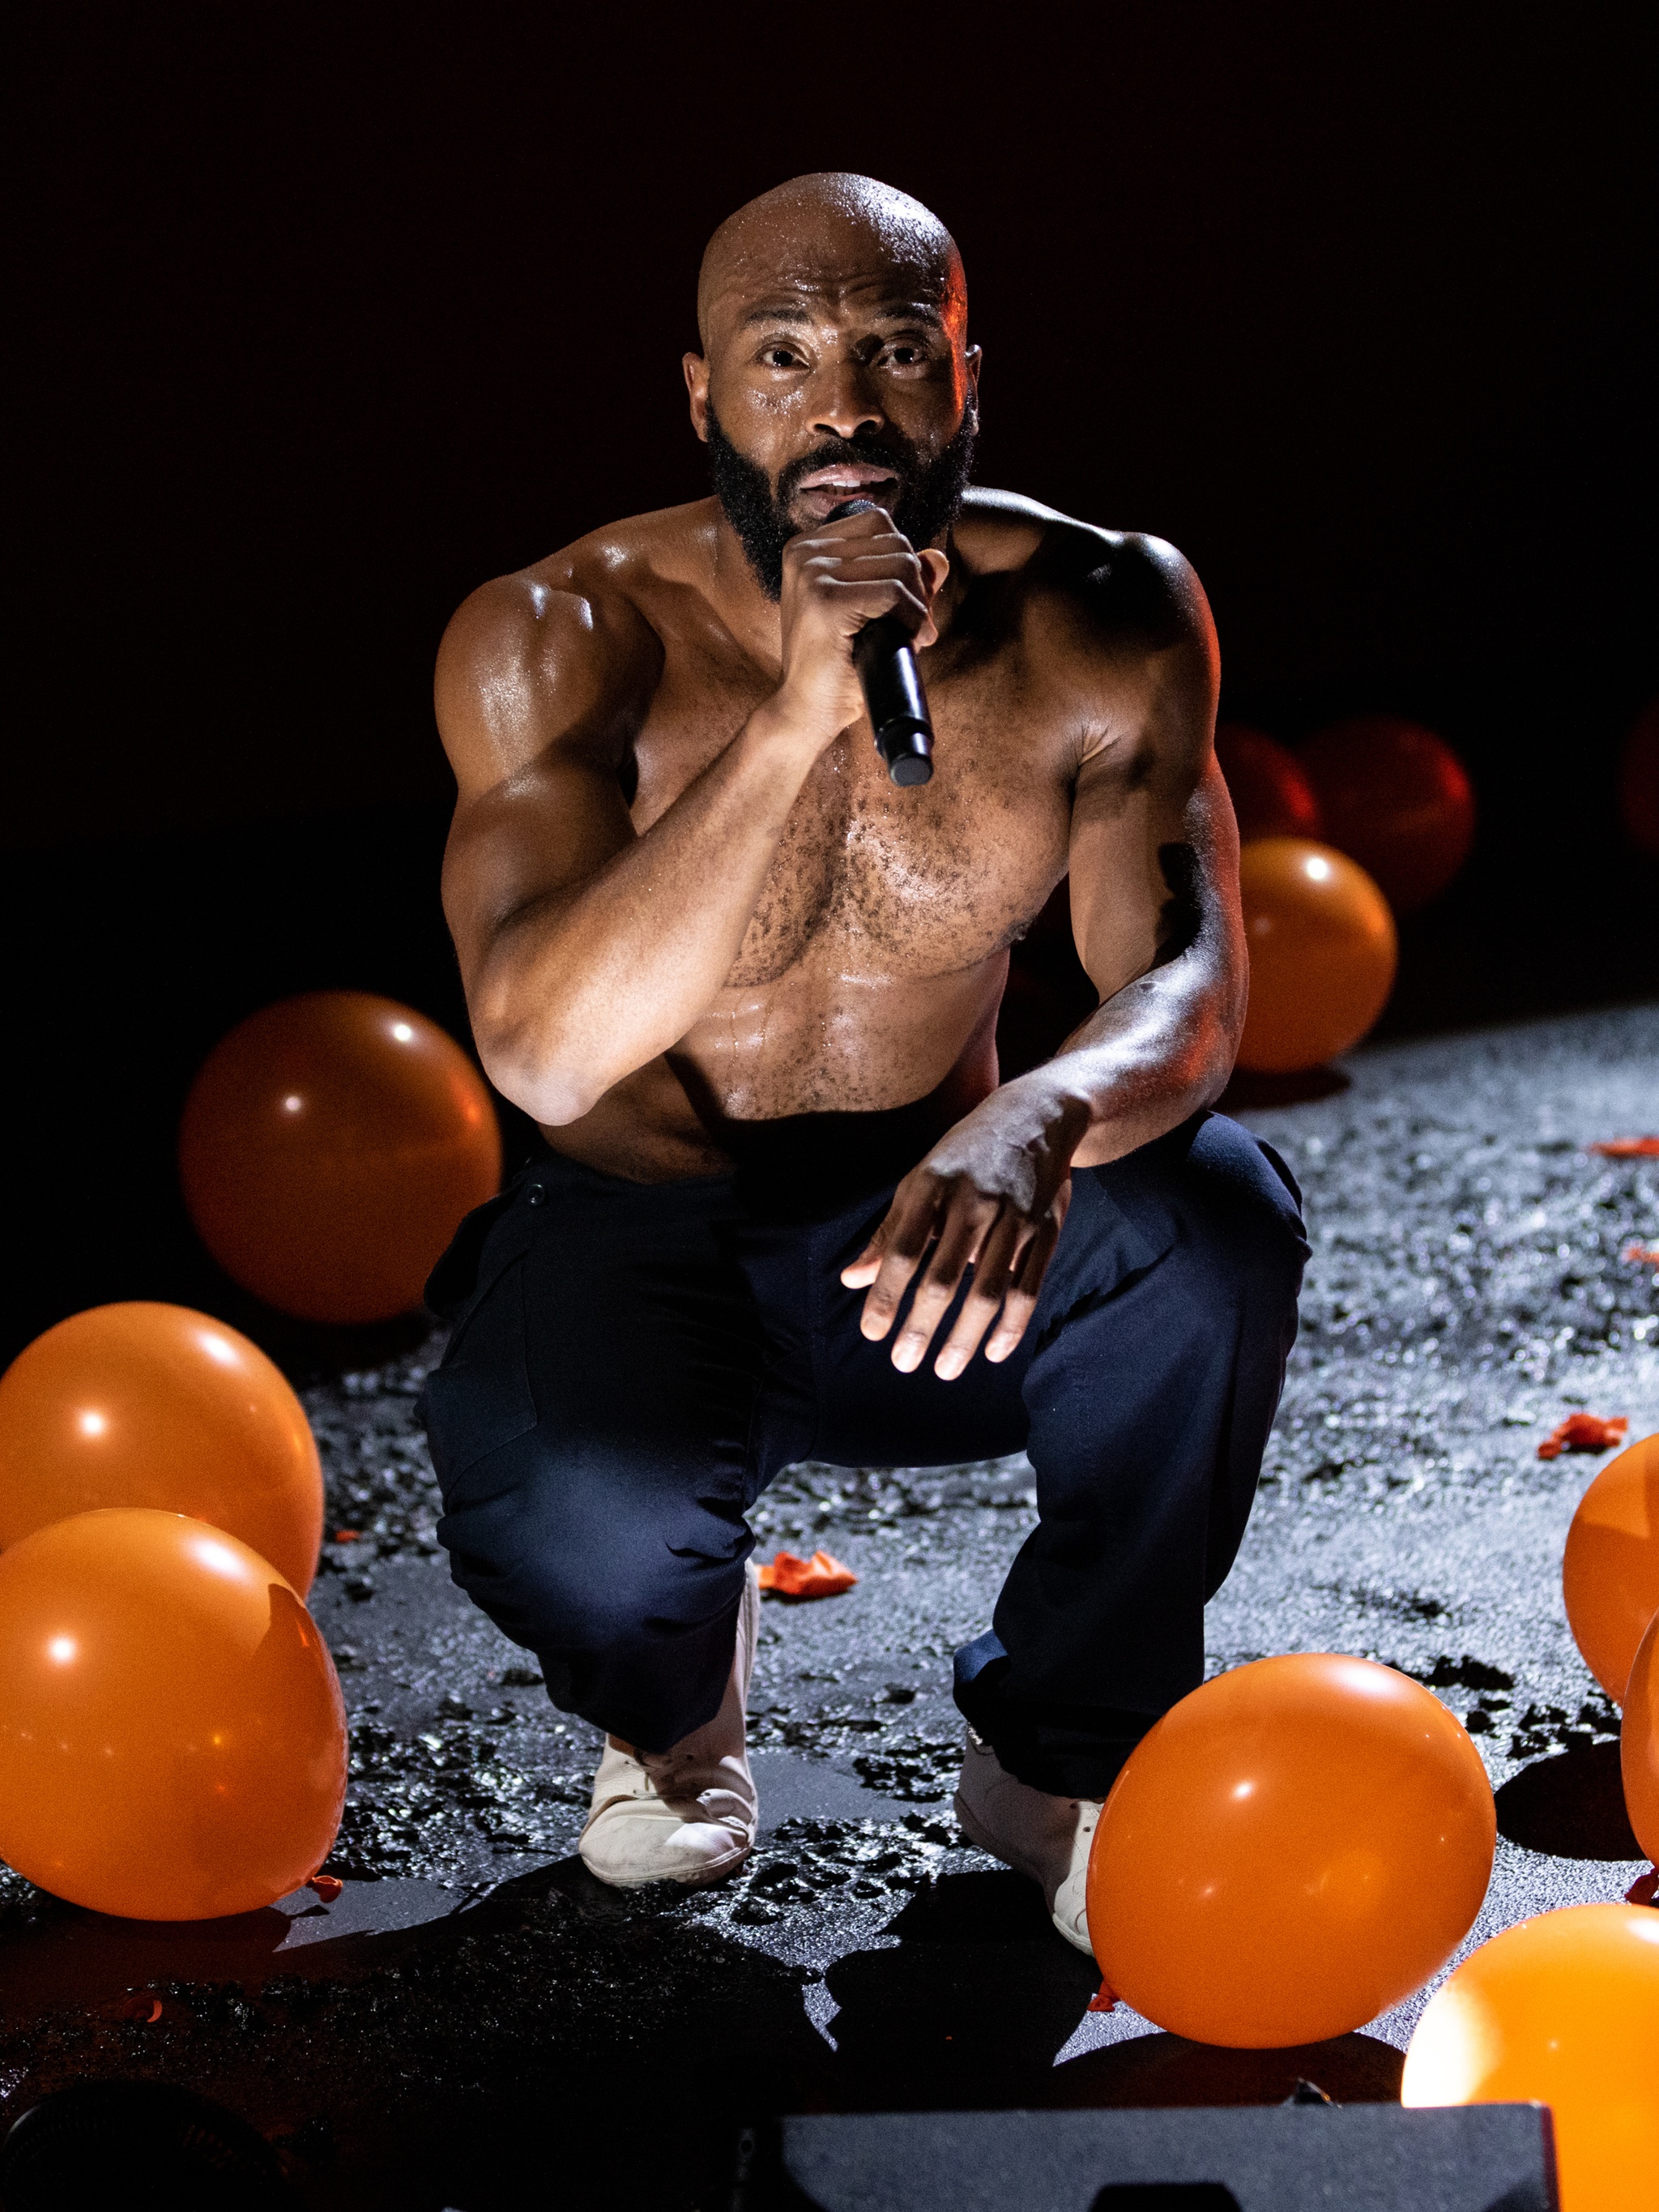 A Black man crouches on a dark stage lit dramatically with a bright light to the right. He is shirtless in blue pants with several inflated orange balloons drifting on the stage around him. He speaks into a microphone that he holds to his face. 